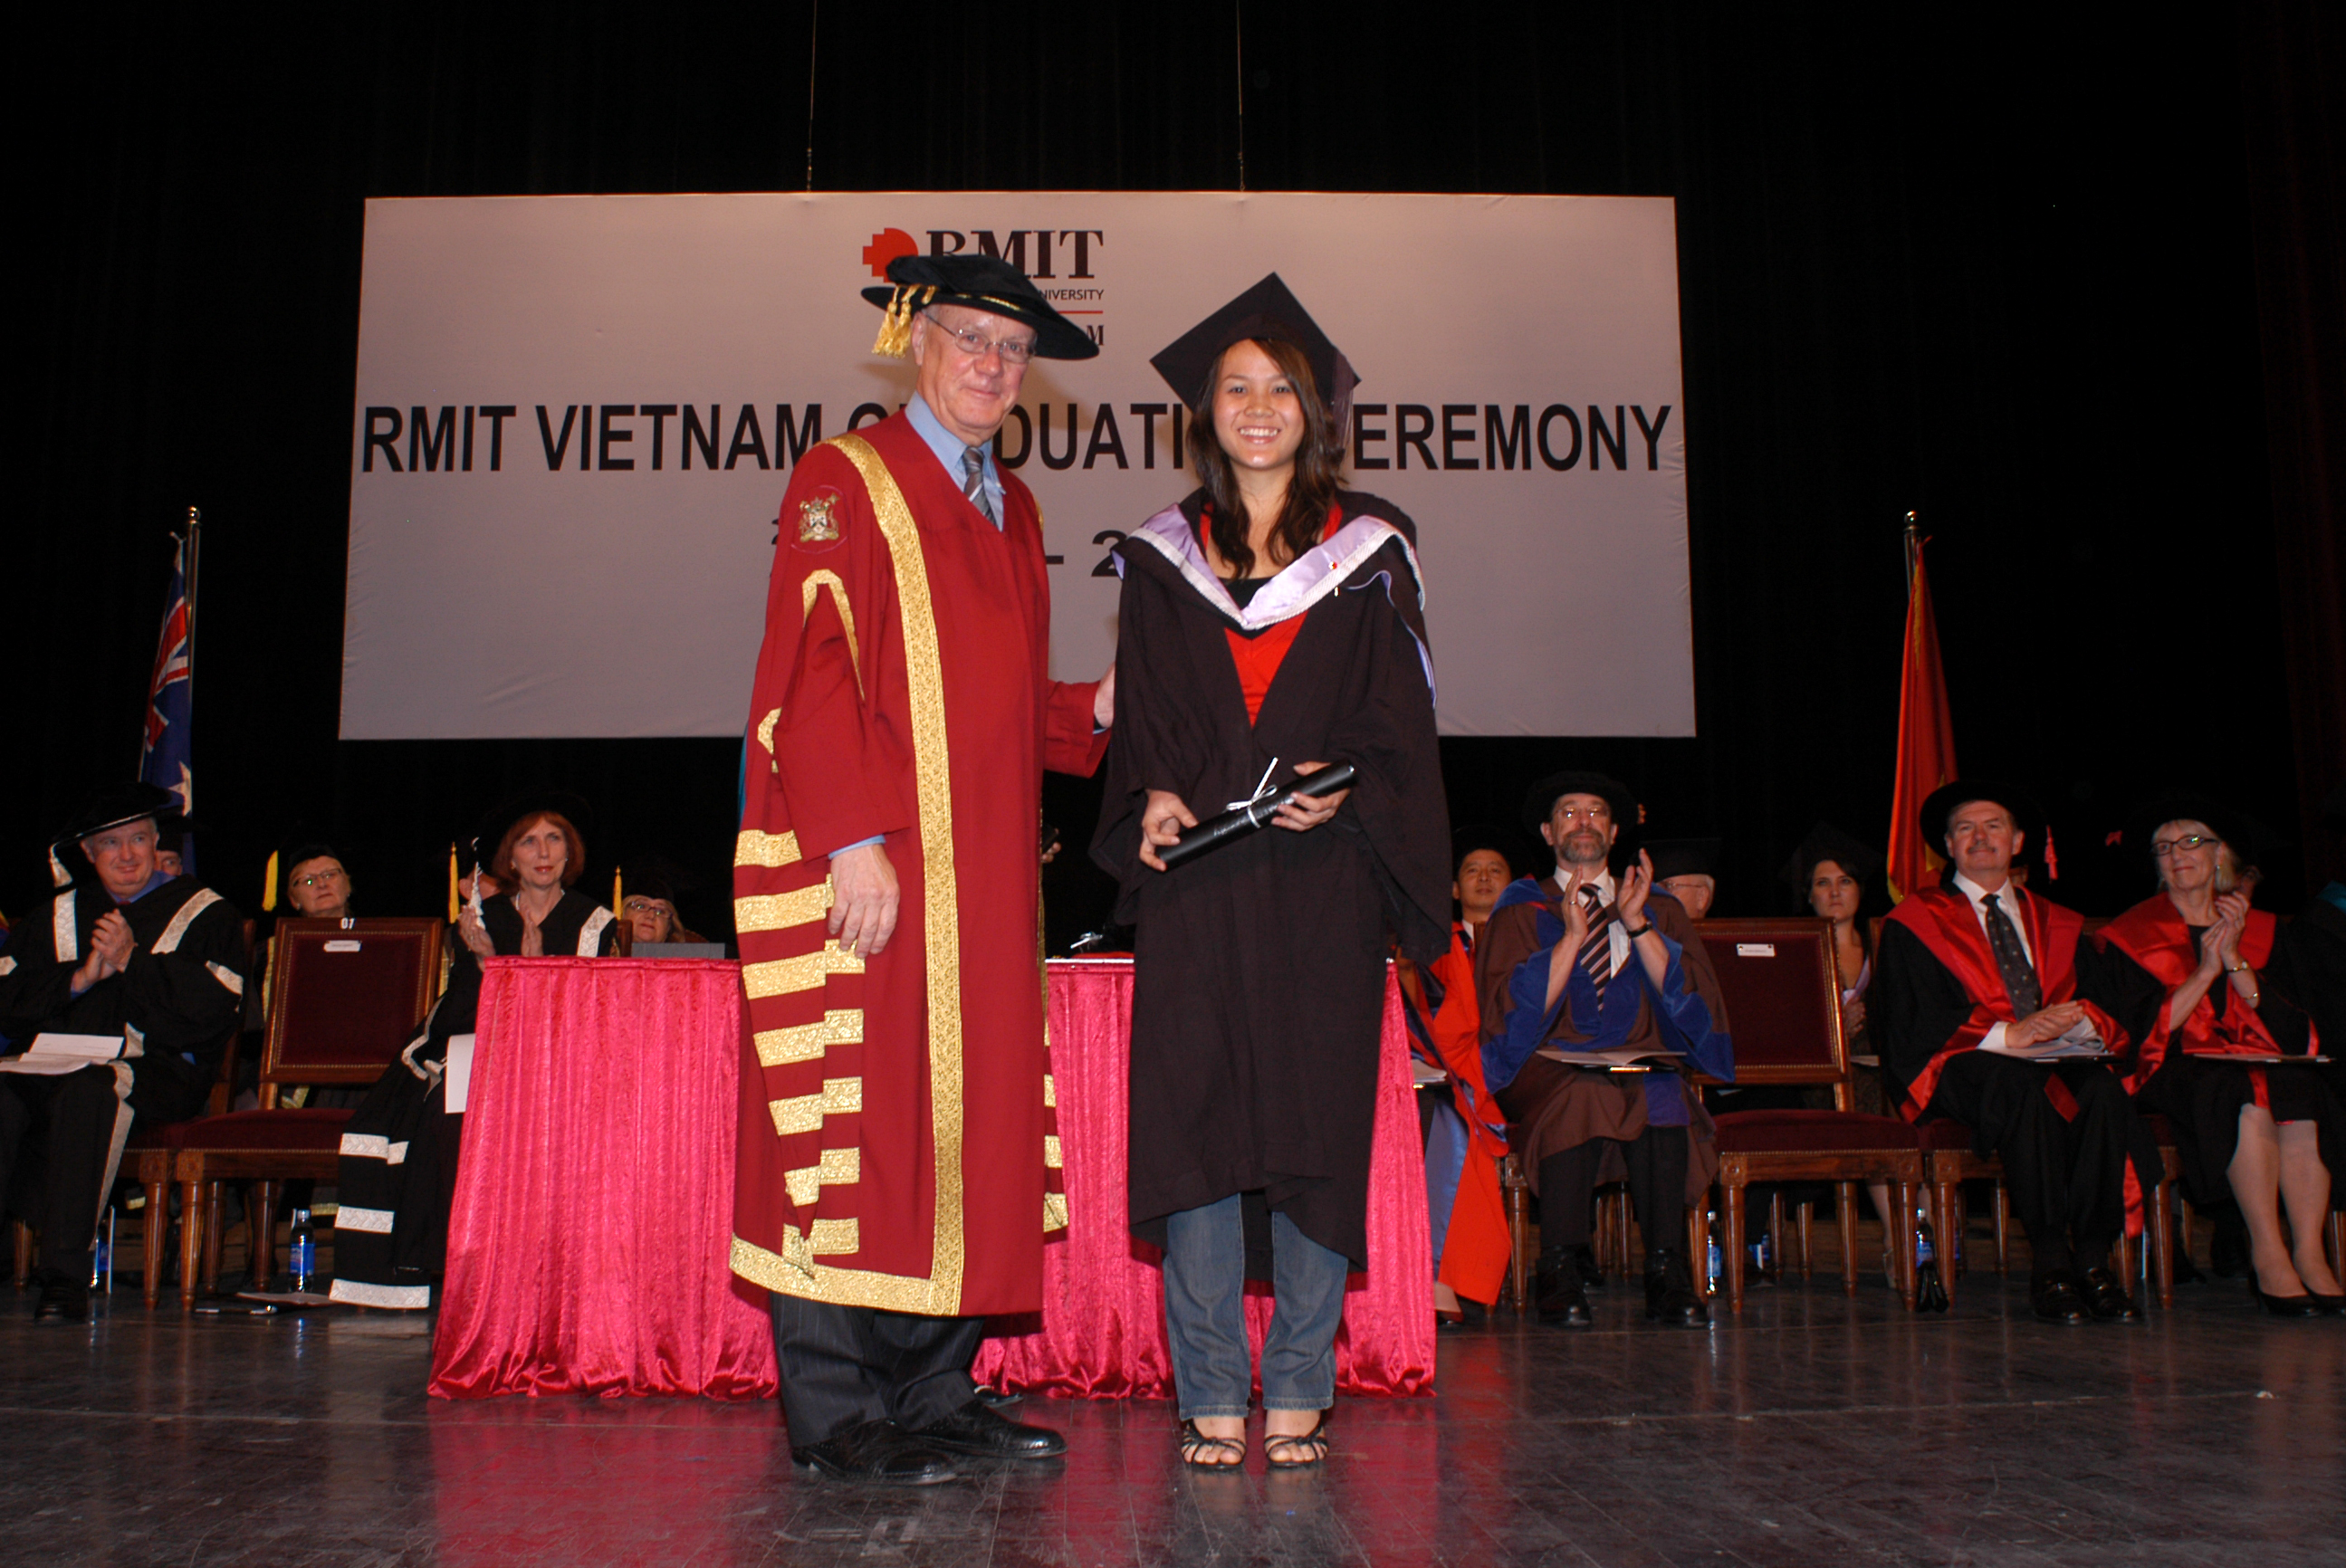 Pham Nhat Nga (pictured right) was one of the first graduates with distinction from RMIT Vietnam’s Hanoi campus in 2007.